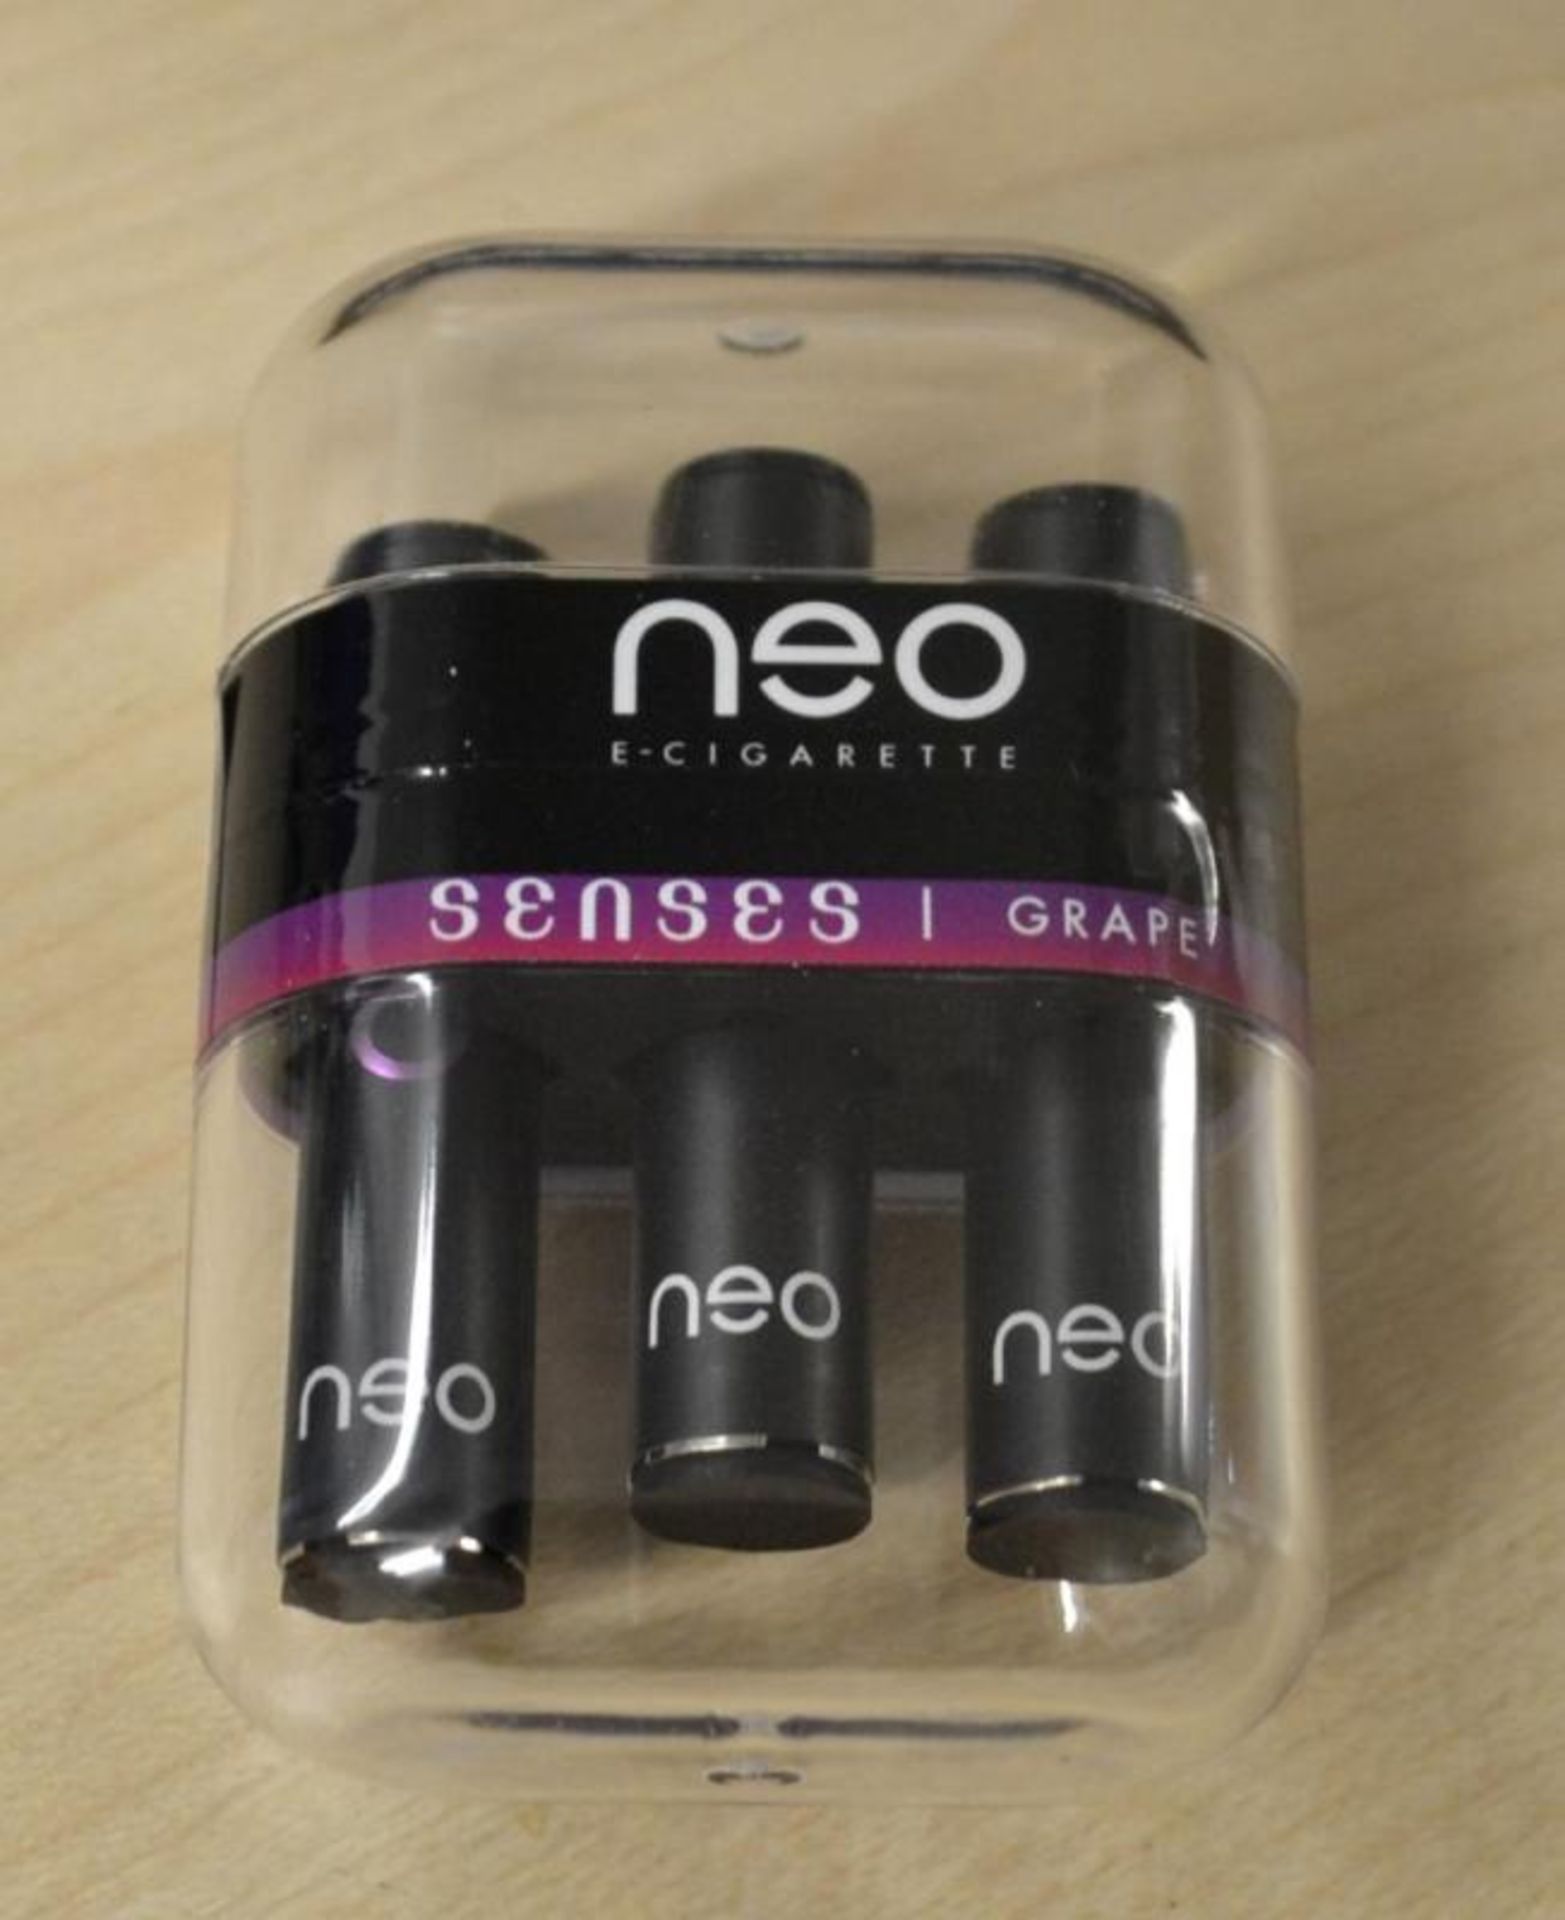 36 x Neo E-Cigarettes Neo Infinity Grape Refill Packs - New & Sealed Stock - CL185 - Ref: DRTGRP - L - Image 4 of 7